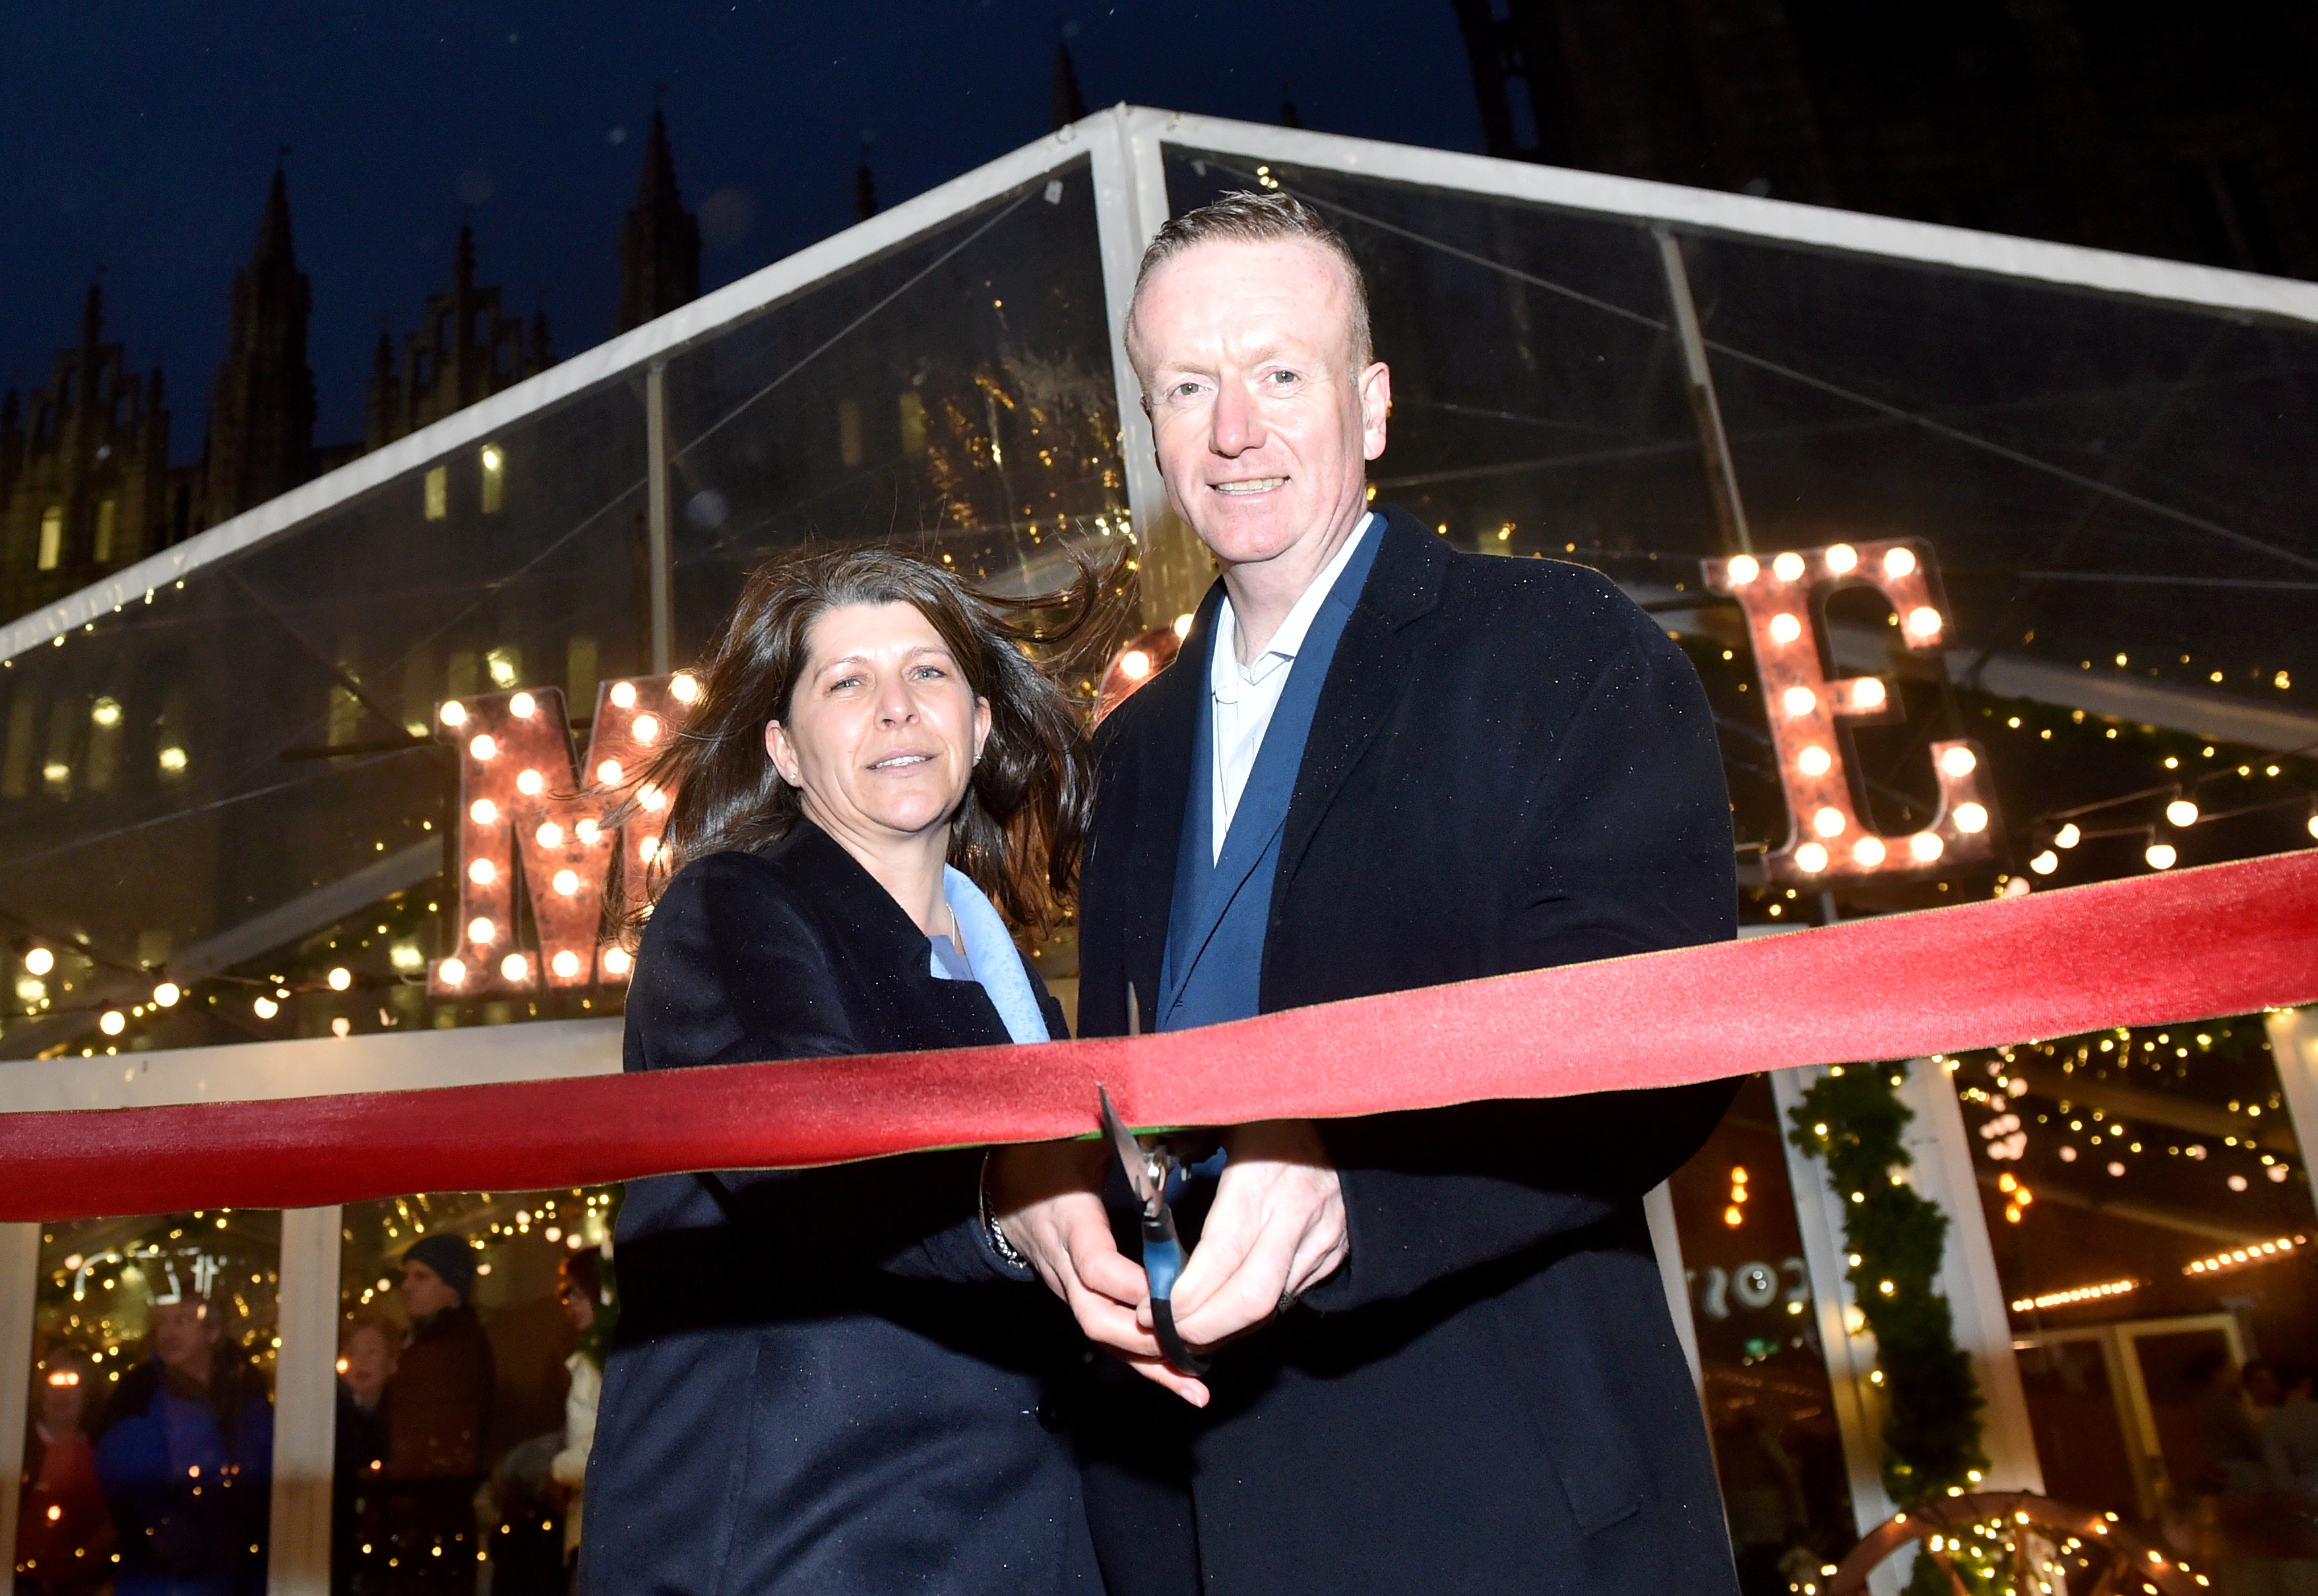 Aberdeen City Council culture spokeswoman Marie Boulton and Aberdeen Inspired chief executive Adrian Watson opened the Christmas Village.